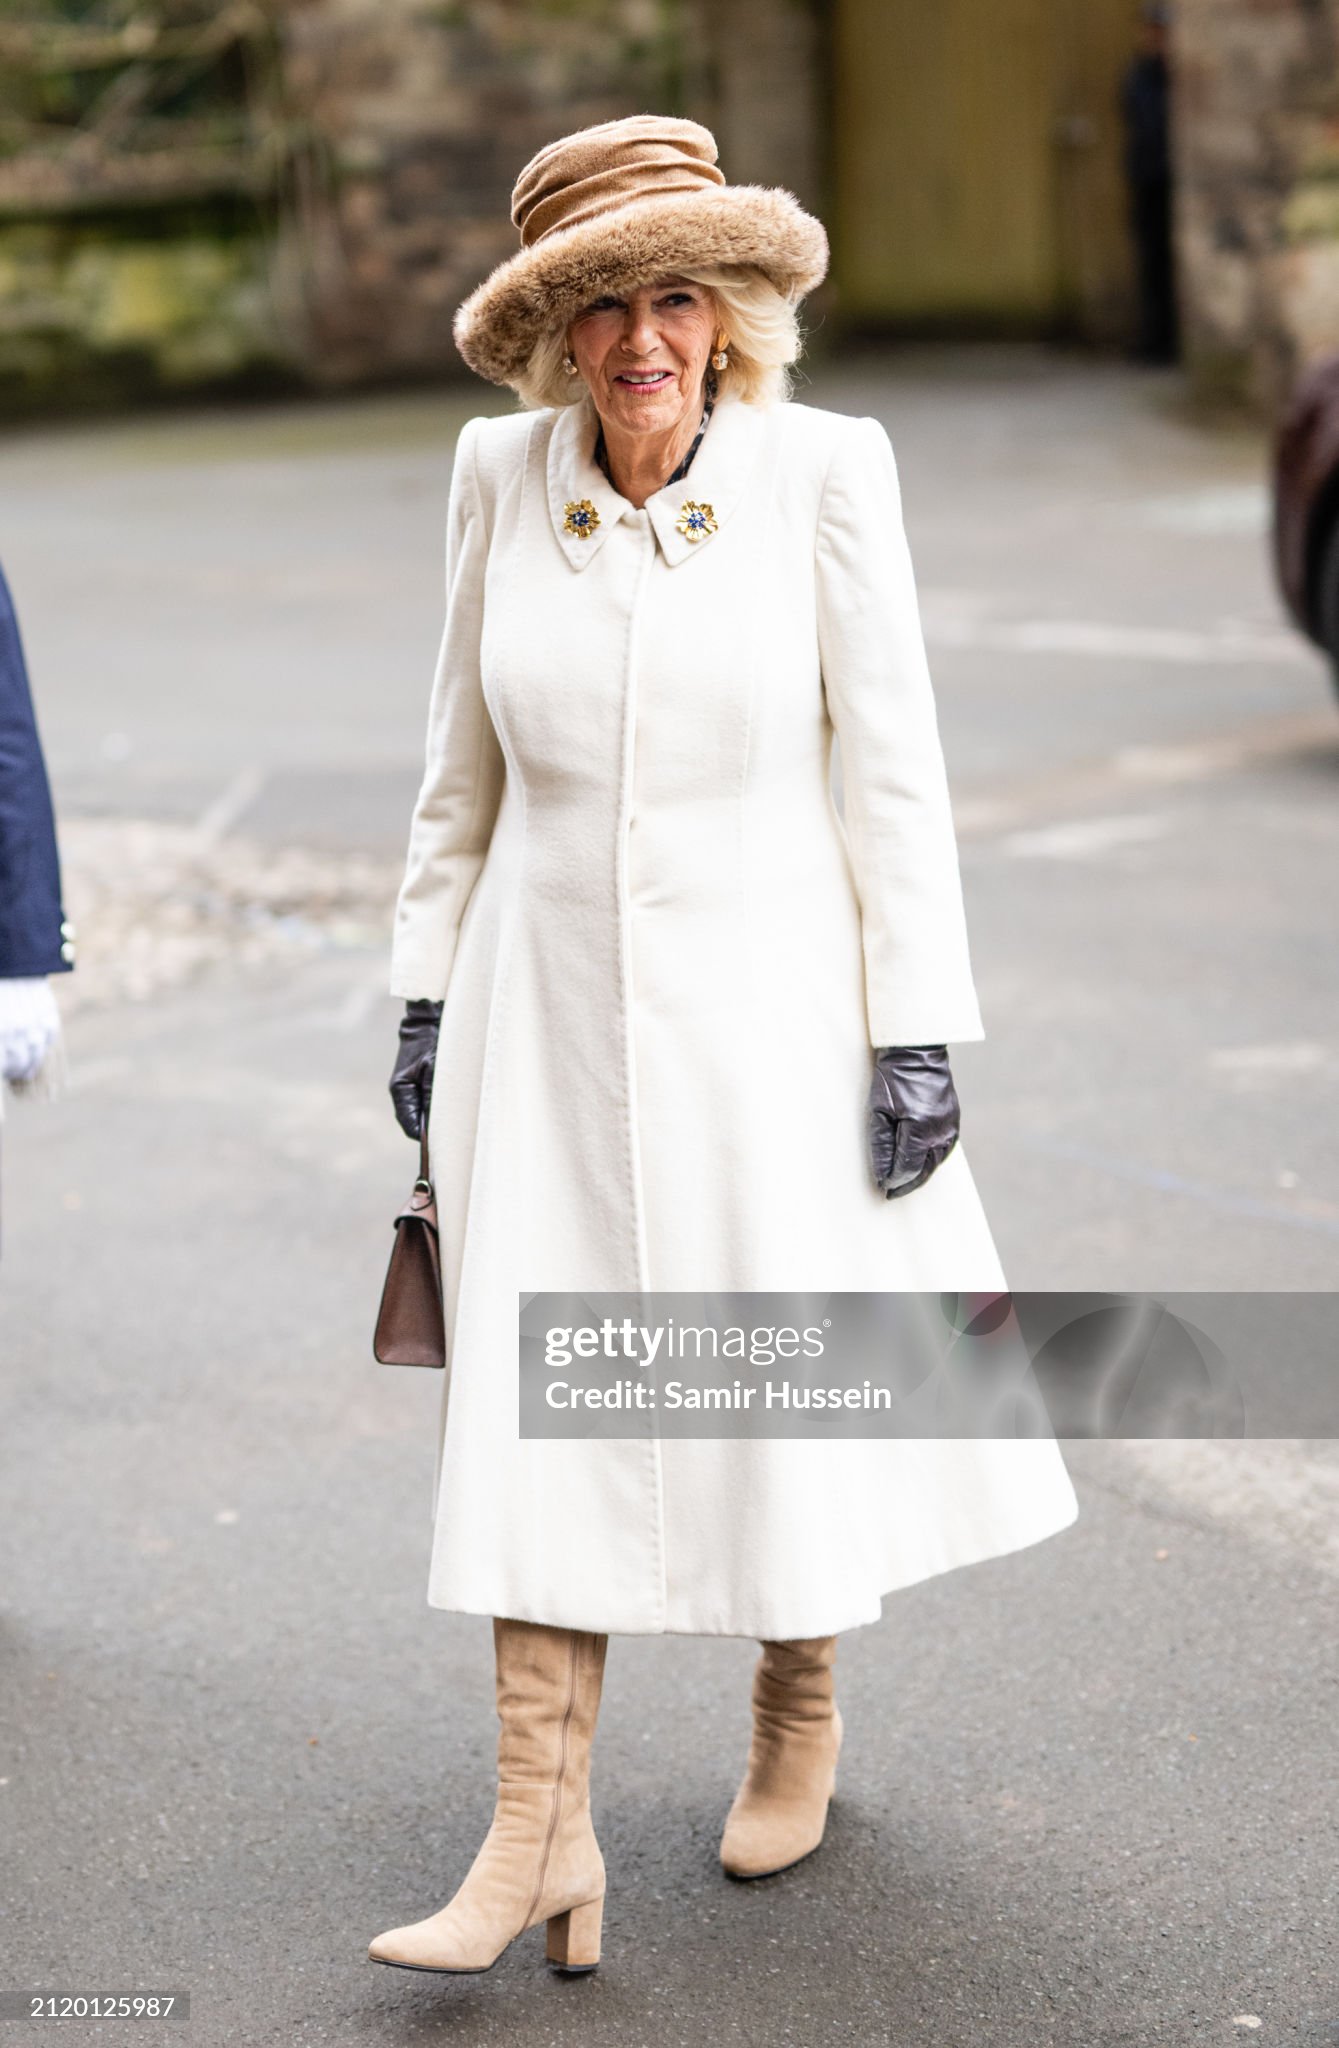 queen-camilla-attends-the-royal-maundy-service-at-worcester-cathedral.jpg?s=2048x2048&w=gi&k=20&c=sdBnjQRSUH3COOlo98hFCzHTCeqZljxr0yFdRquij4Q=